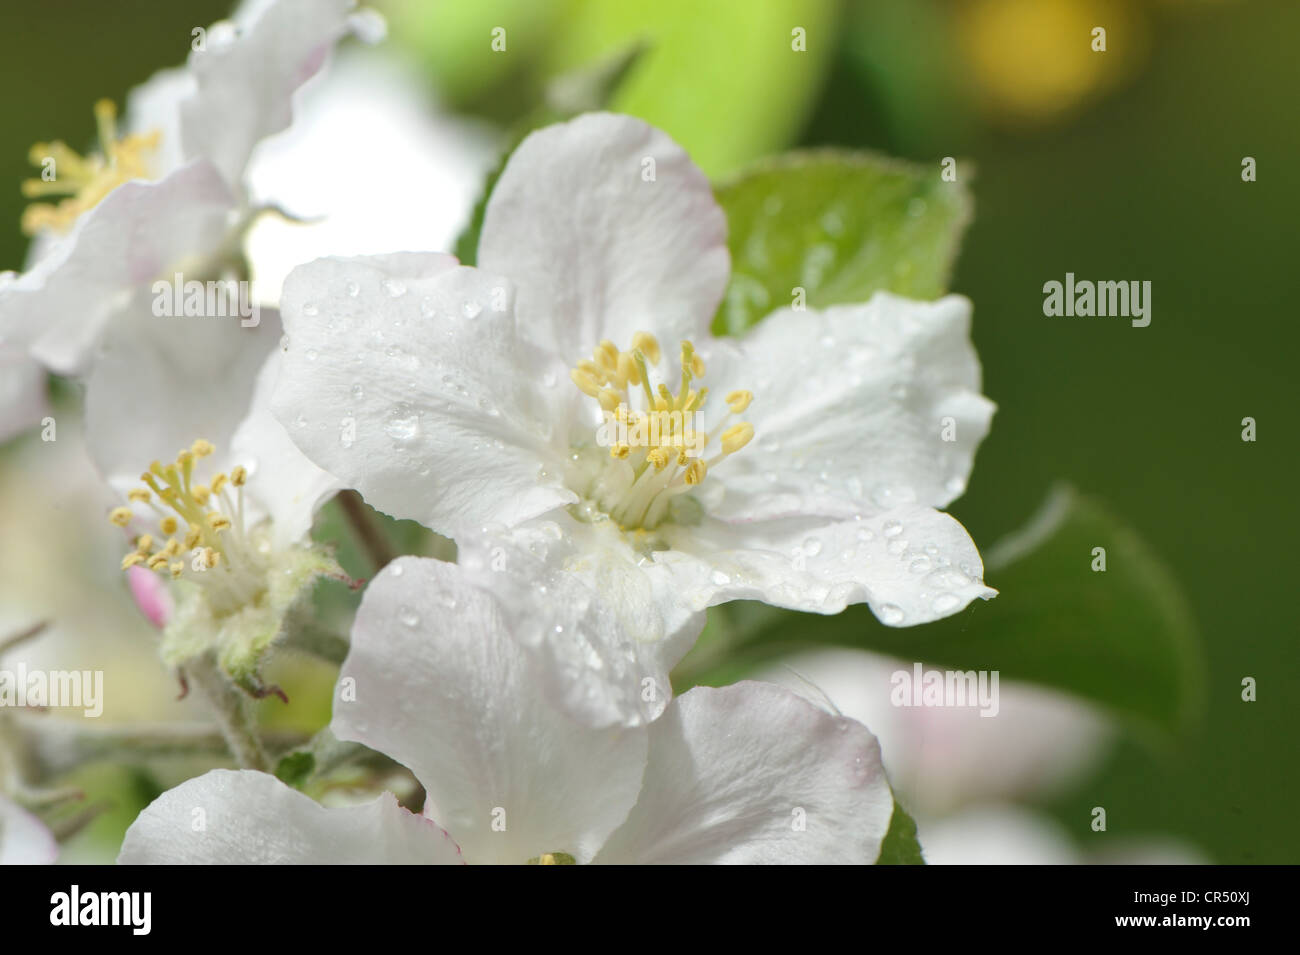 Flowers of a wild pear (Pyrus pyraster) Stock Photo